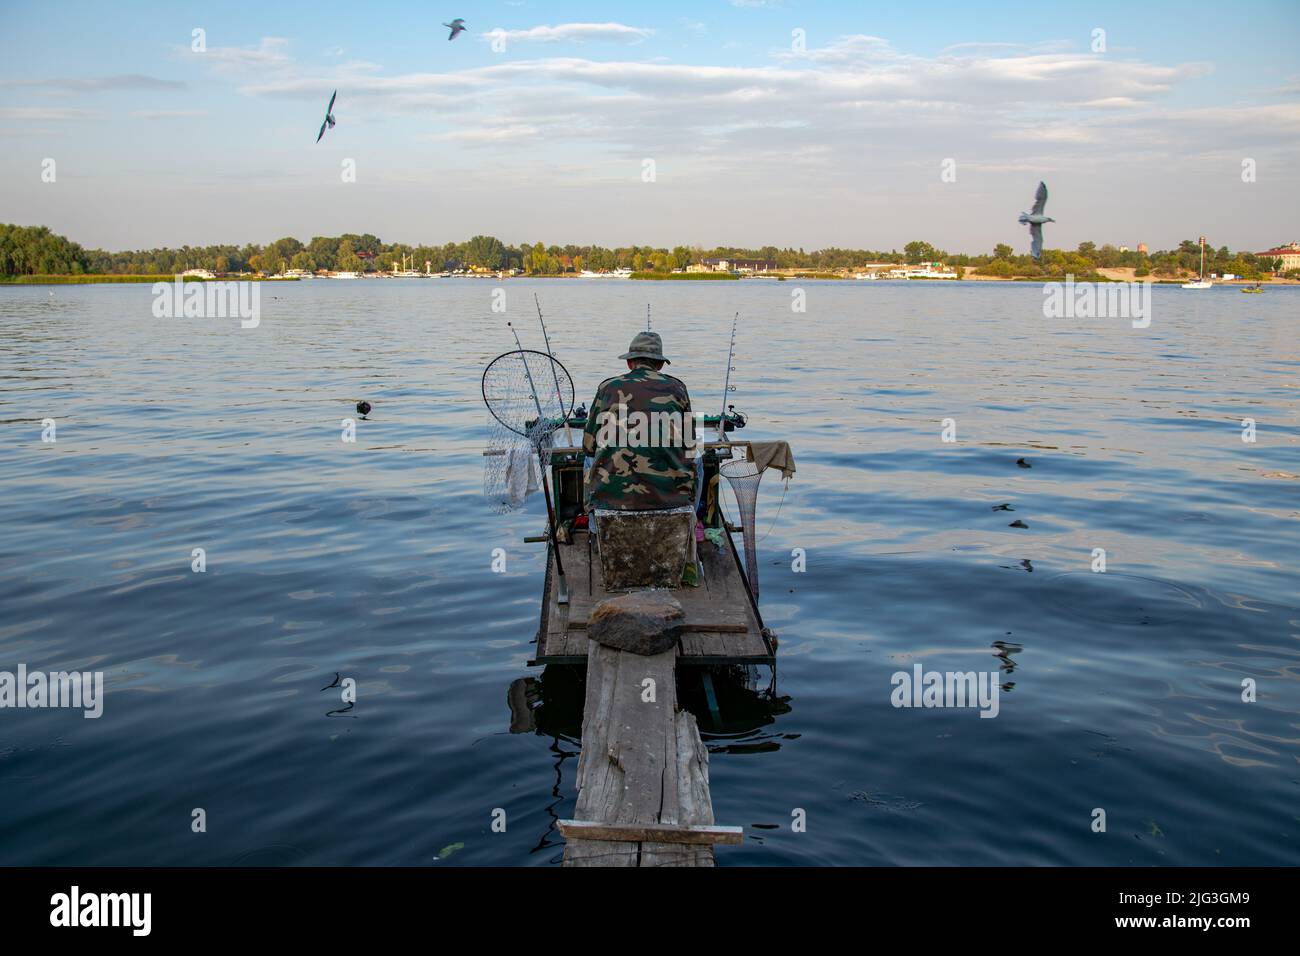 https://c8.alamy.com/comp/2JG3GM9/the-fisherman-sits-on-the-river-on-the-pier-relaxes-and-enjoys-fishing-back-view-of-fisherman-with-a-lot-of-fishing-rods-and-a-net-for-fish-fishing-2JG3GM9.jpg